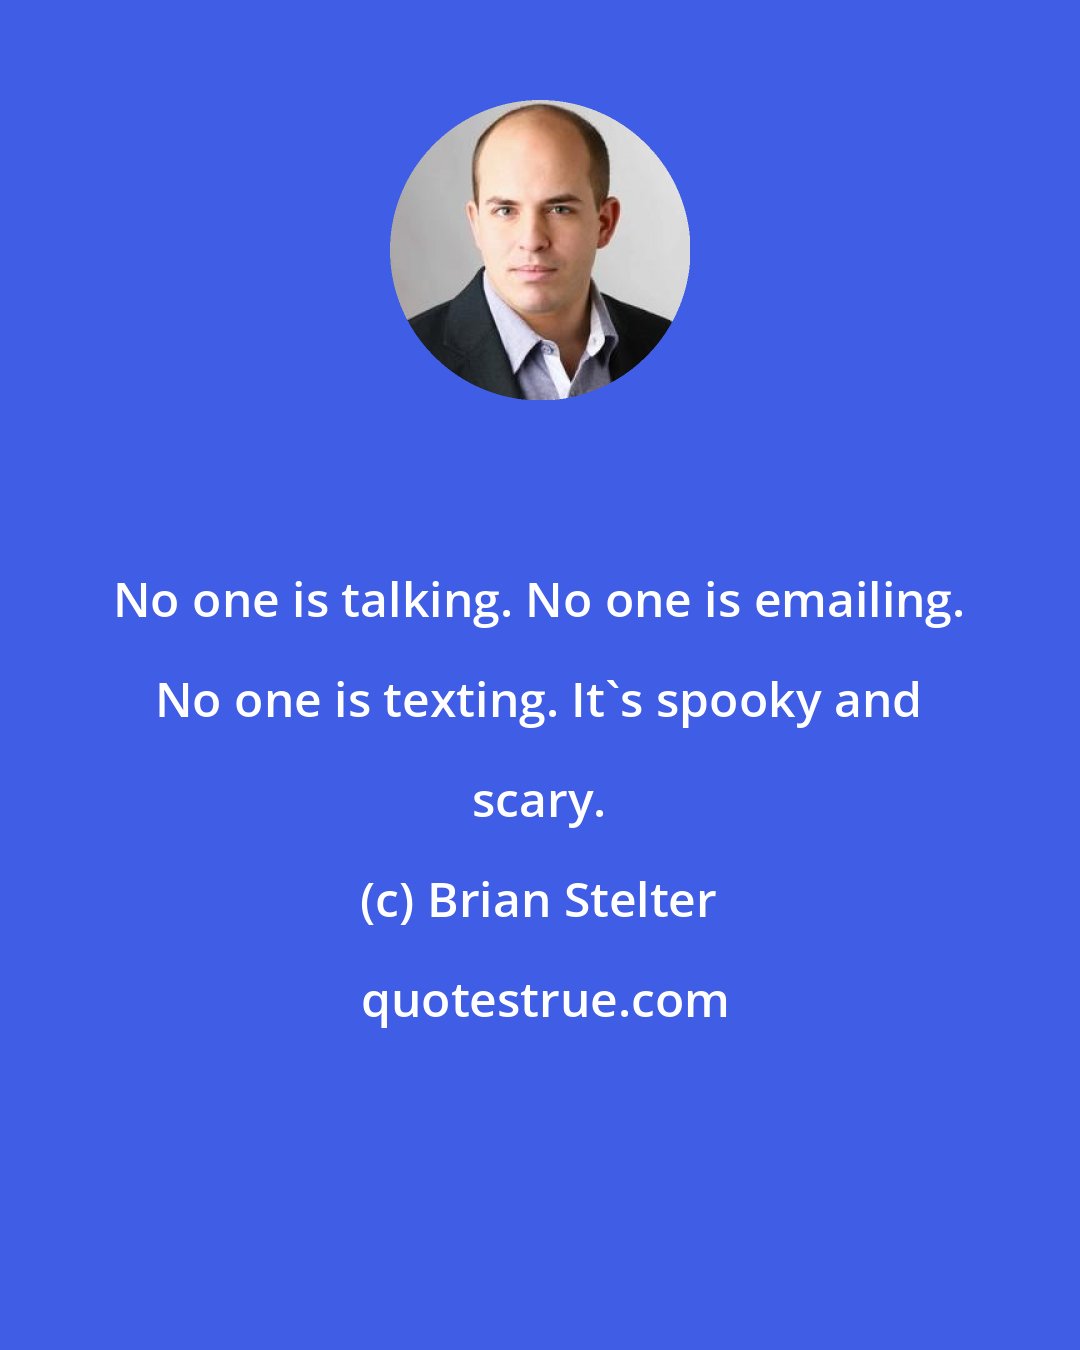 Brian Stelter: No one is talking. No one is emailing. No one is texting. It's spooky and scary.